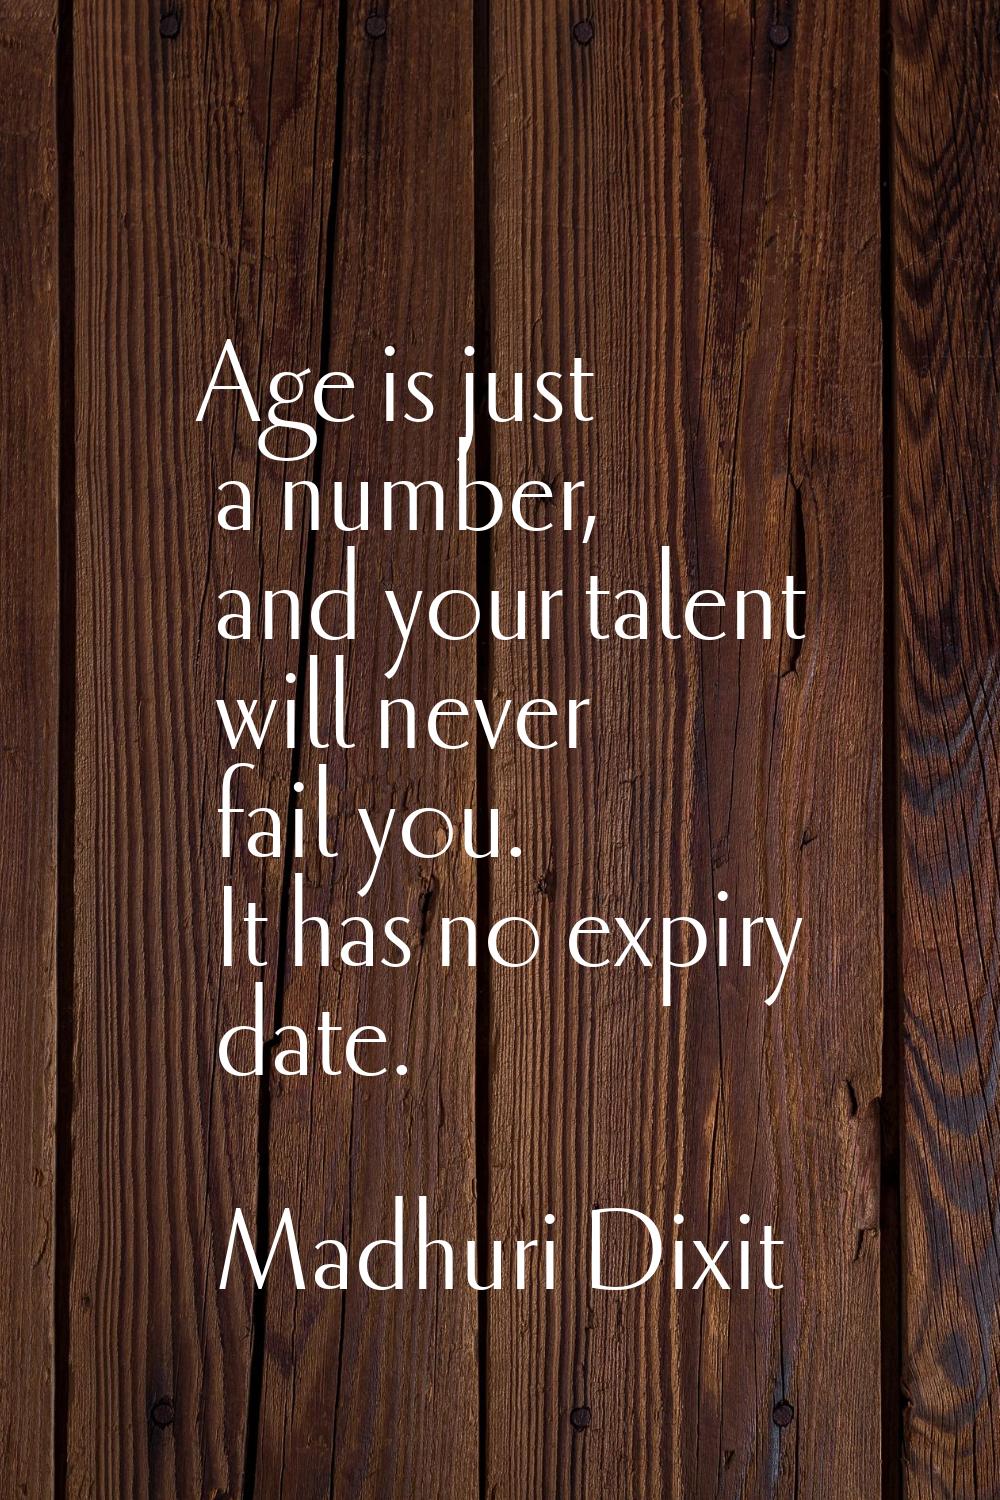 Age is just a number, and your talent will never fail you. It has no expiry date.